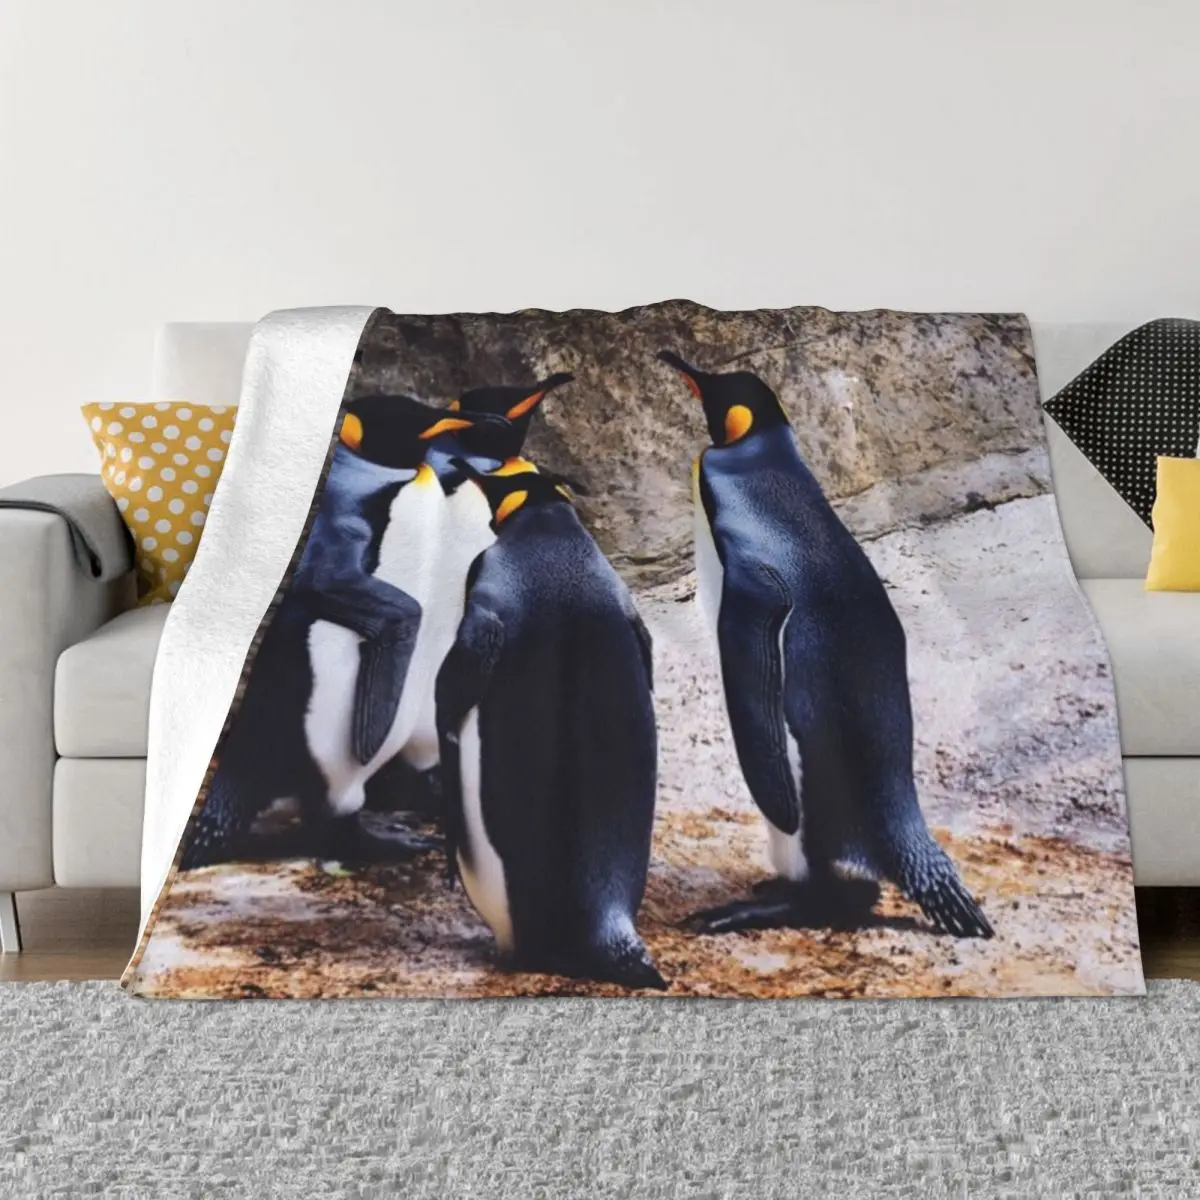 

Singing Penguin Soft Throw Blanket Animal Pattern Blankets Lightweight Tufted Fuzzy Flannel Fleece Throws Blanket for Sofa Couch